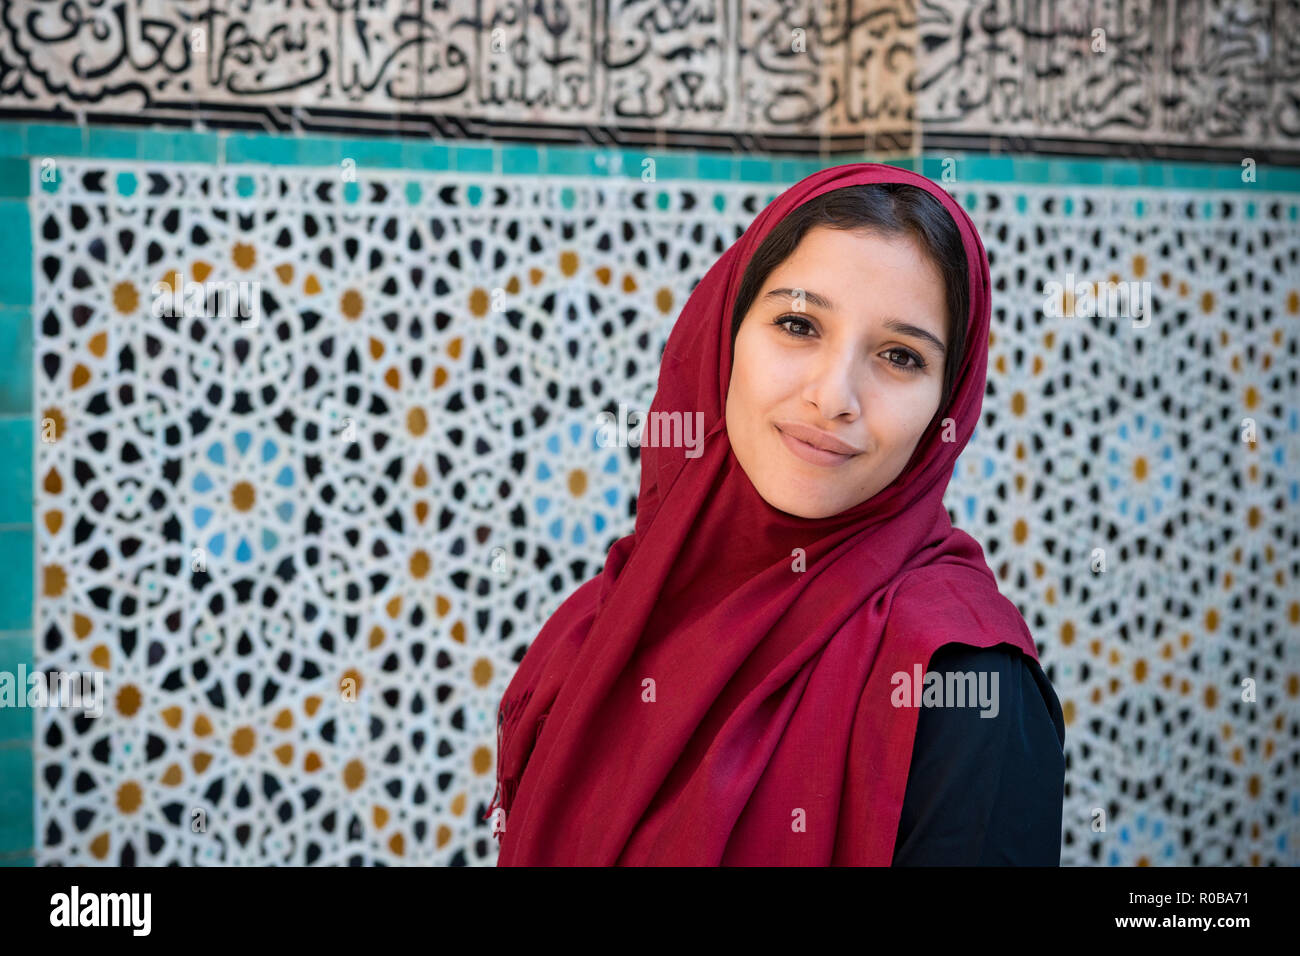 Muslim woman in traditional clothing with red hijab and black dress in front of traditional arabesque decorated wall Stock Photo